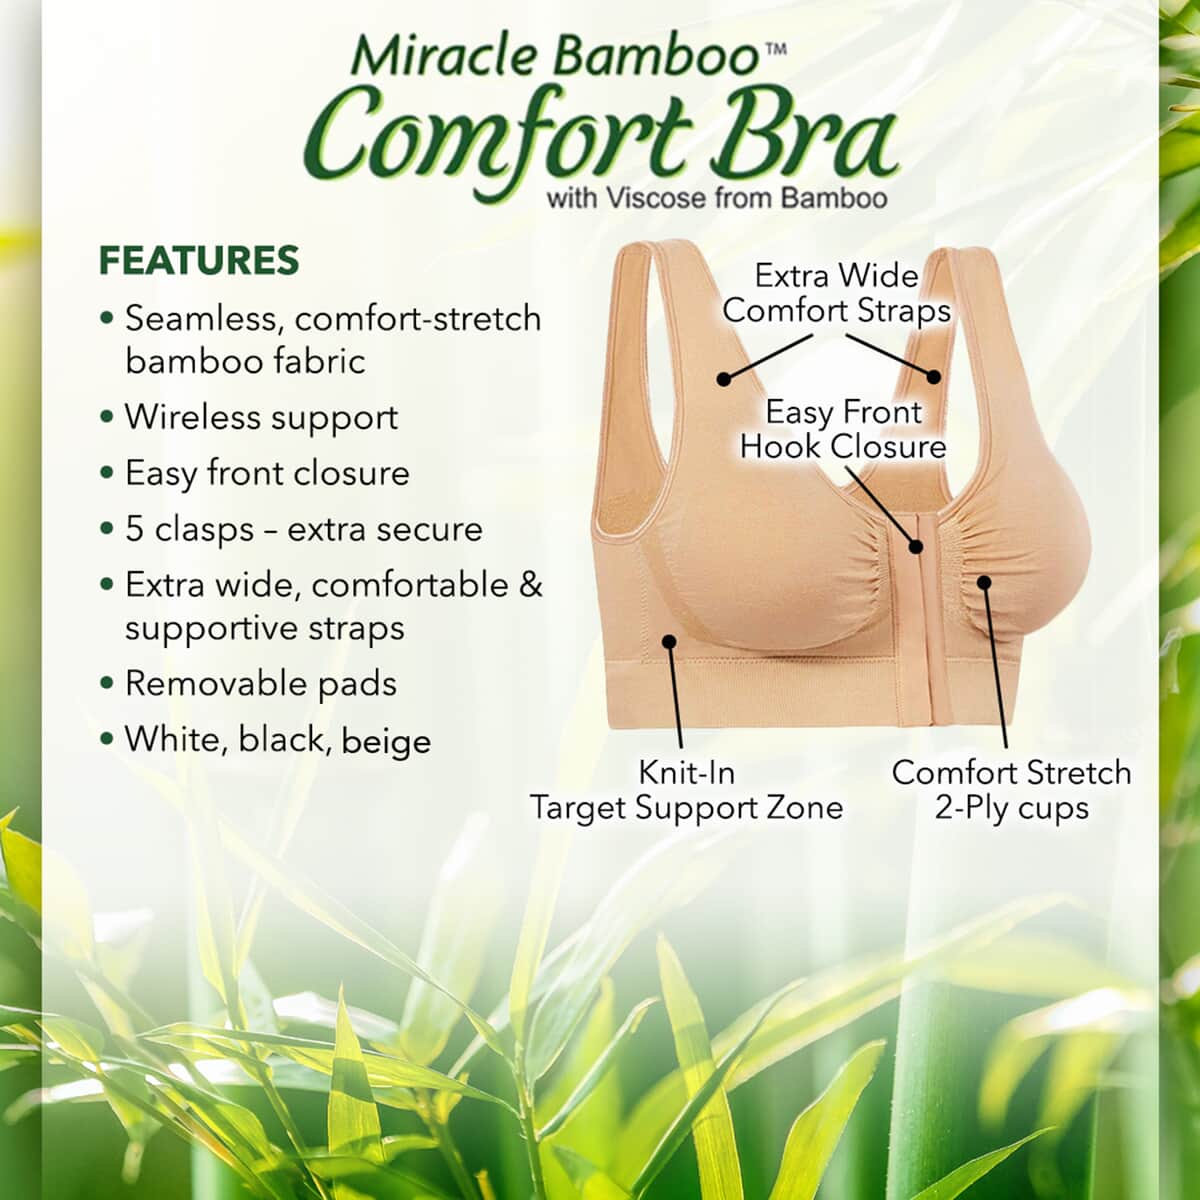 Miracle Bamboo Beyond Comfort Bra Set of 3 Front Closure Bras - Black, Beige and White - Size L image number 1